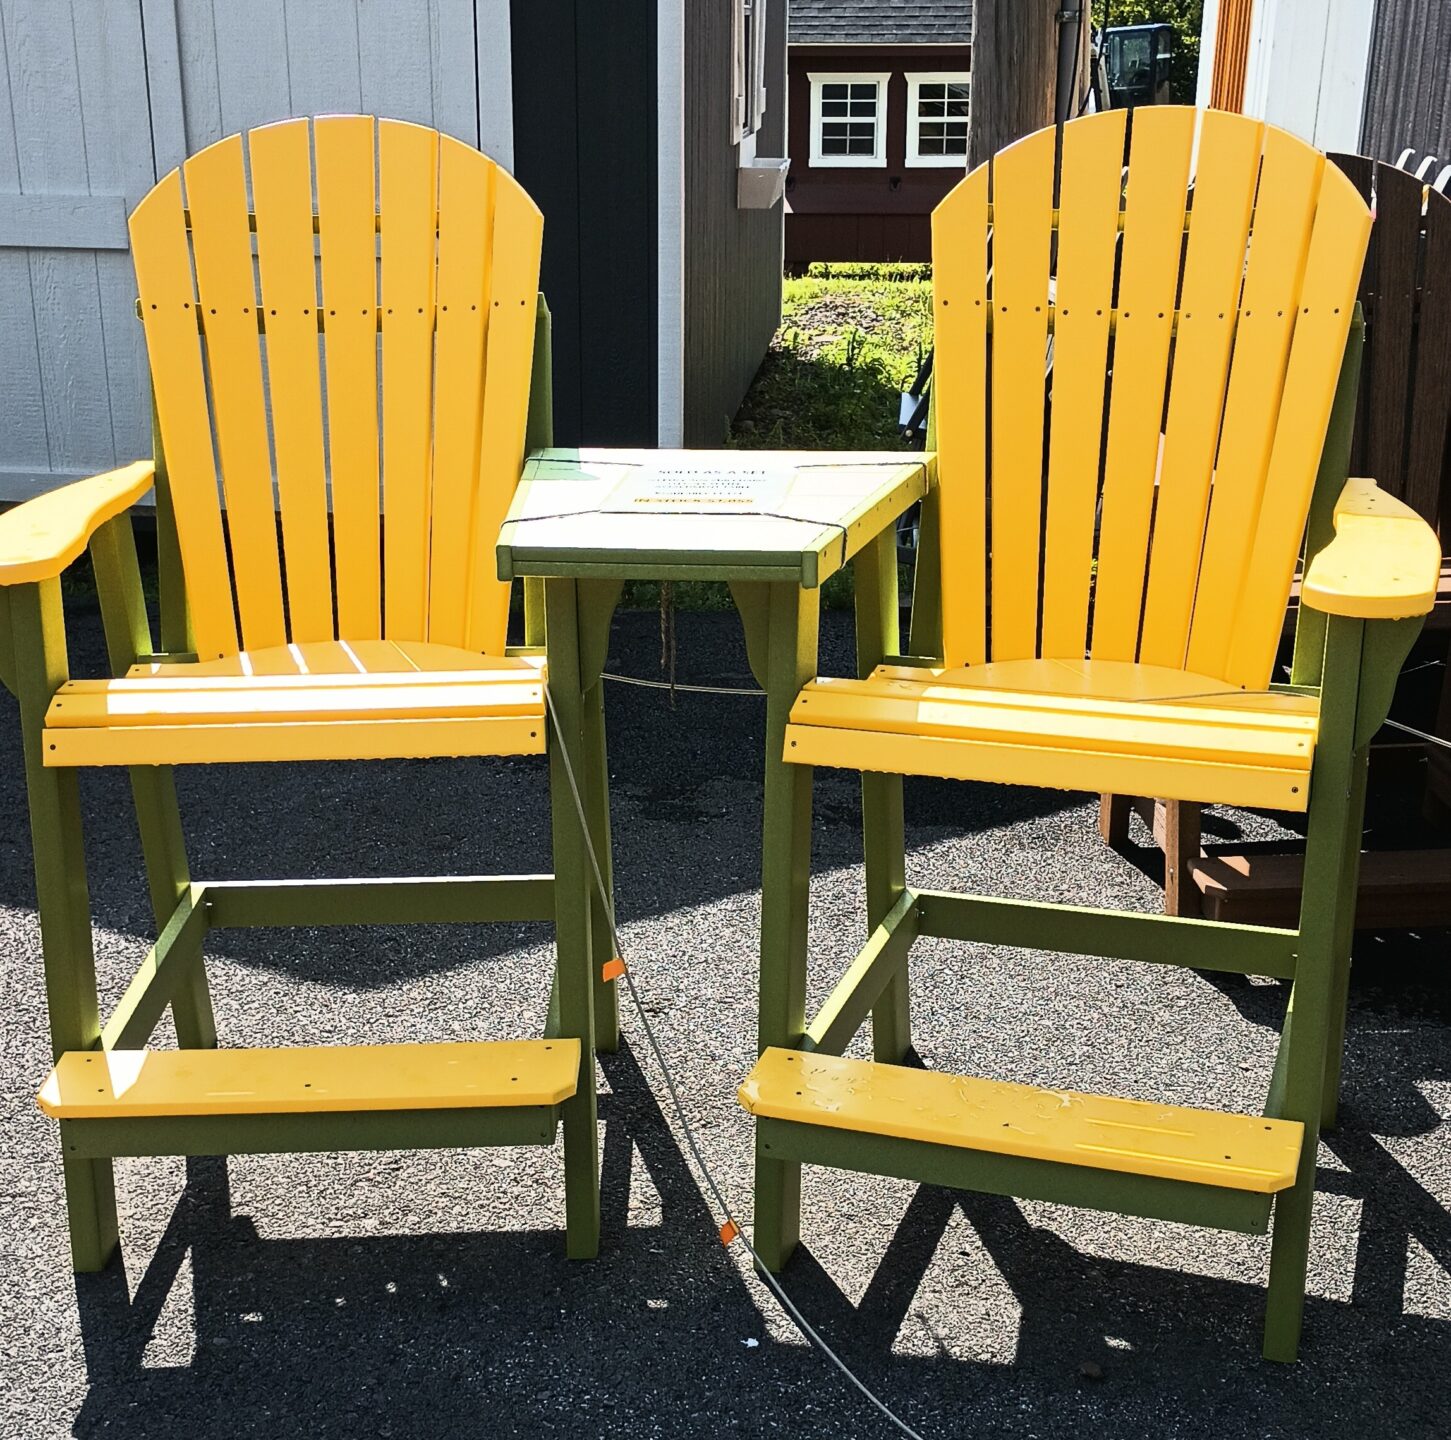 Green and Yellow Chairs with Connector Table